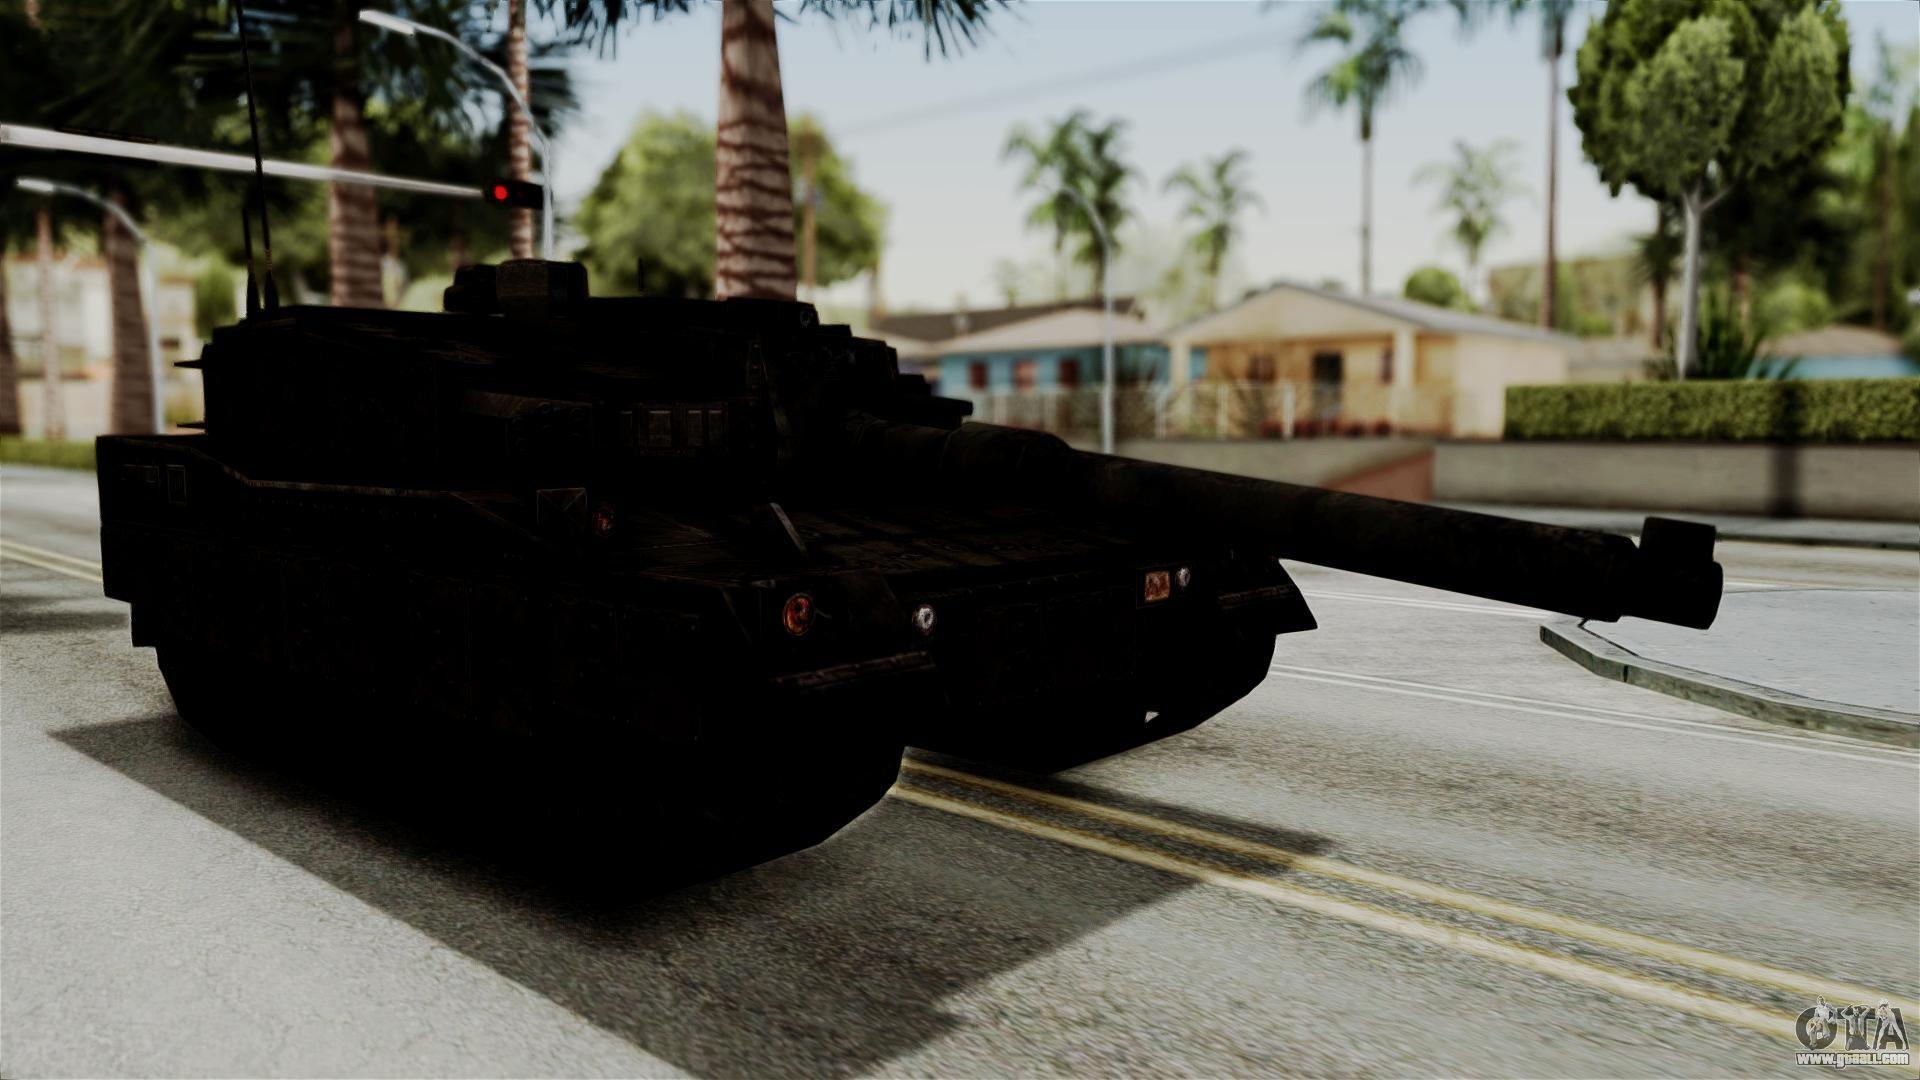 Point Blank Black Panther Rusty for GTA San Andreas